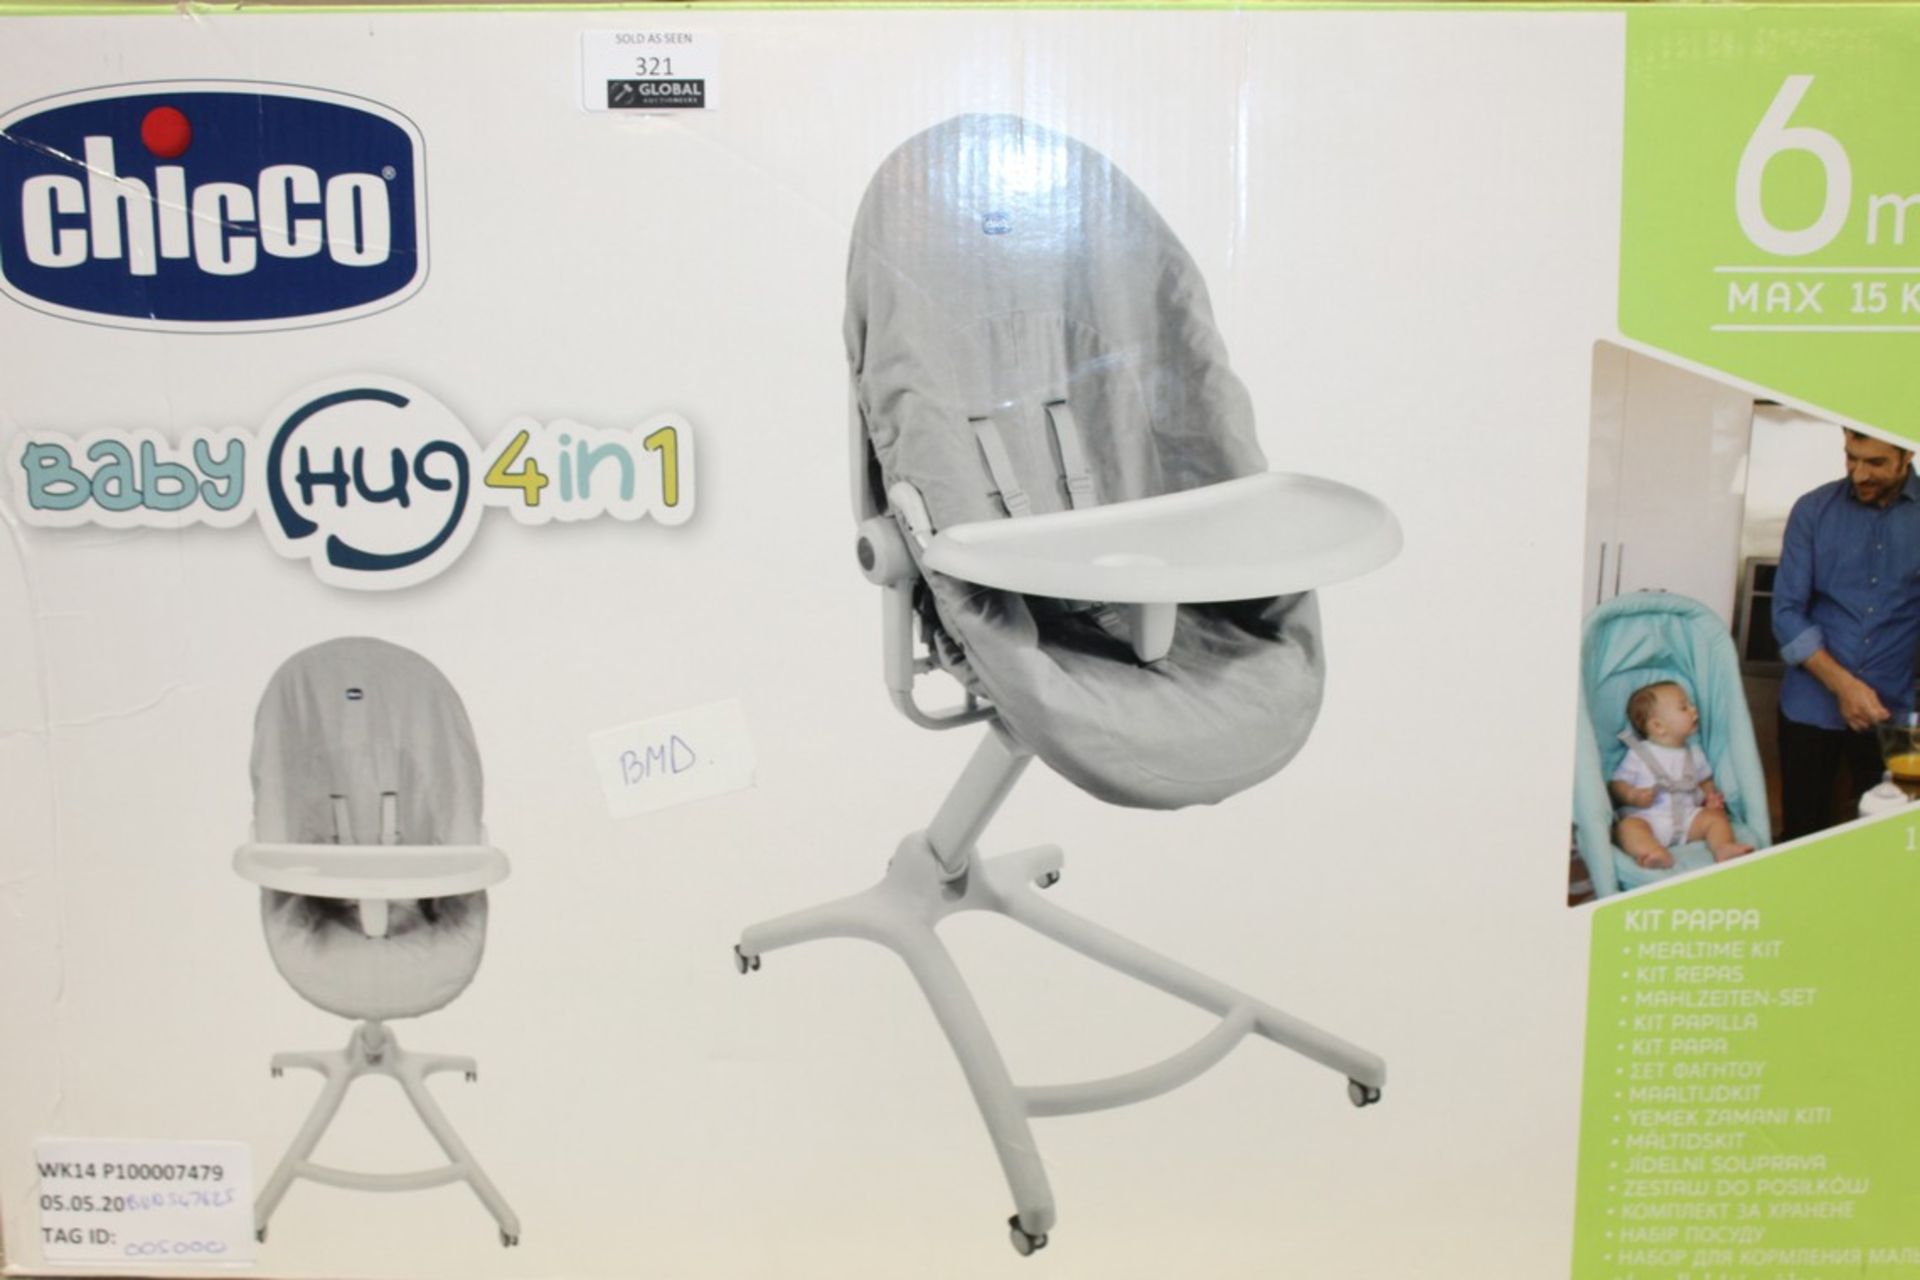 Chicco Baby Hug 4 In 1 High Chair RRP £50 (BUN547625) (Pictures Are For Illustration Purposes